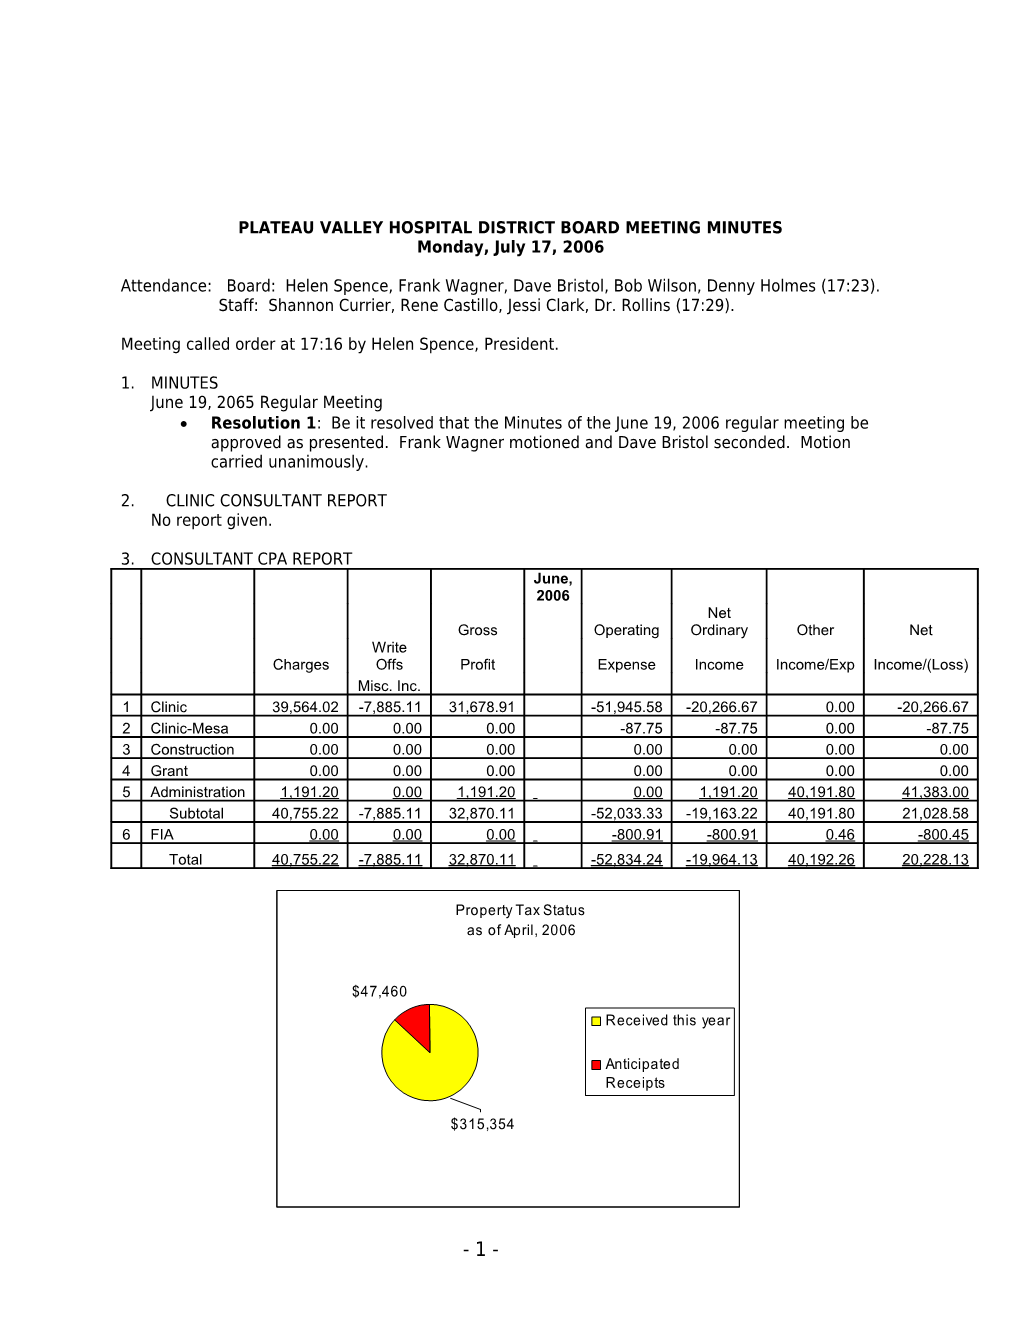 Plateau Valley Hospital District Board Meeting Notice s2